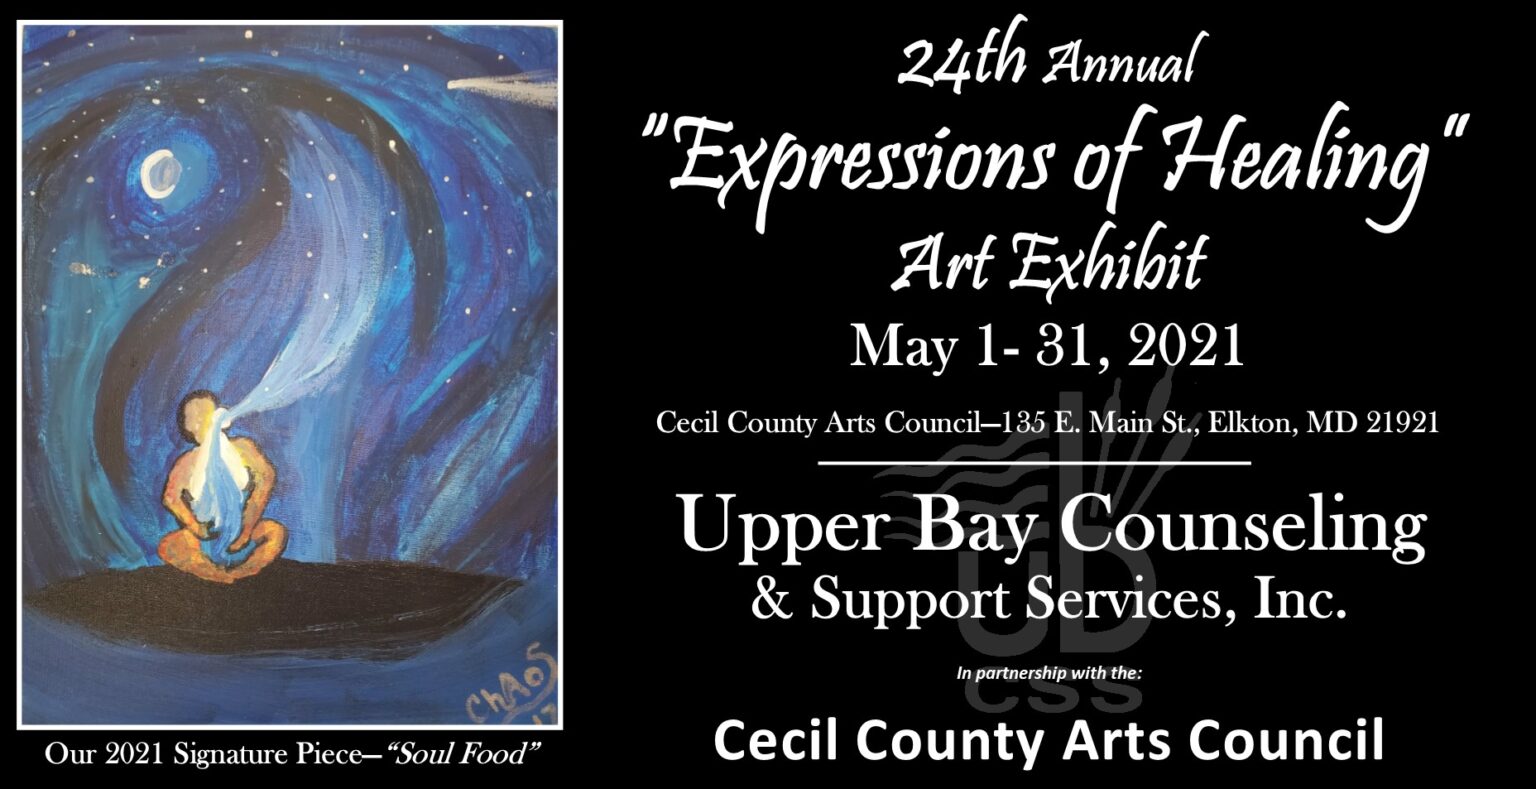 Upper Bay Counseling & Support Services “Expressions of